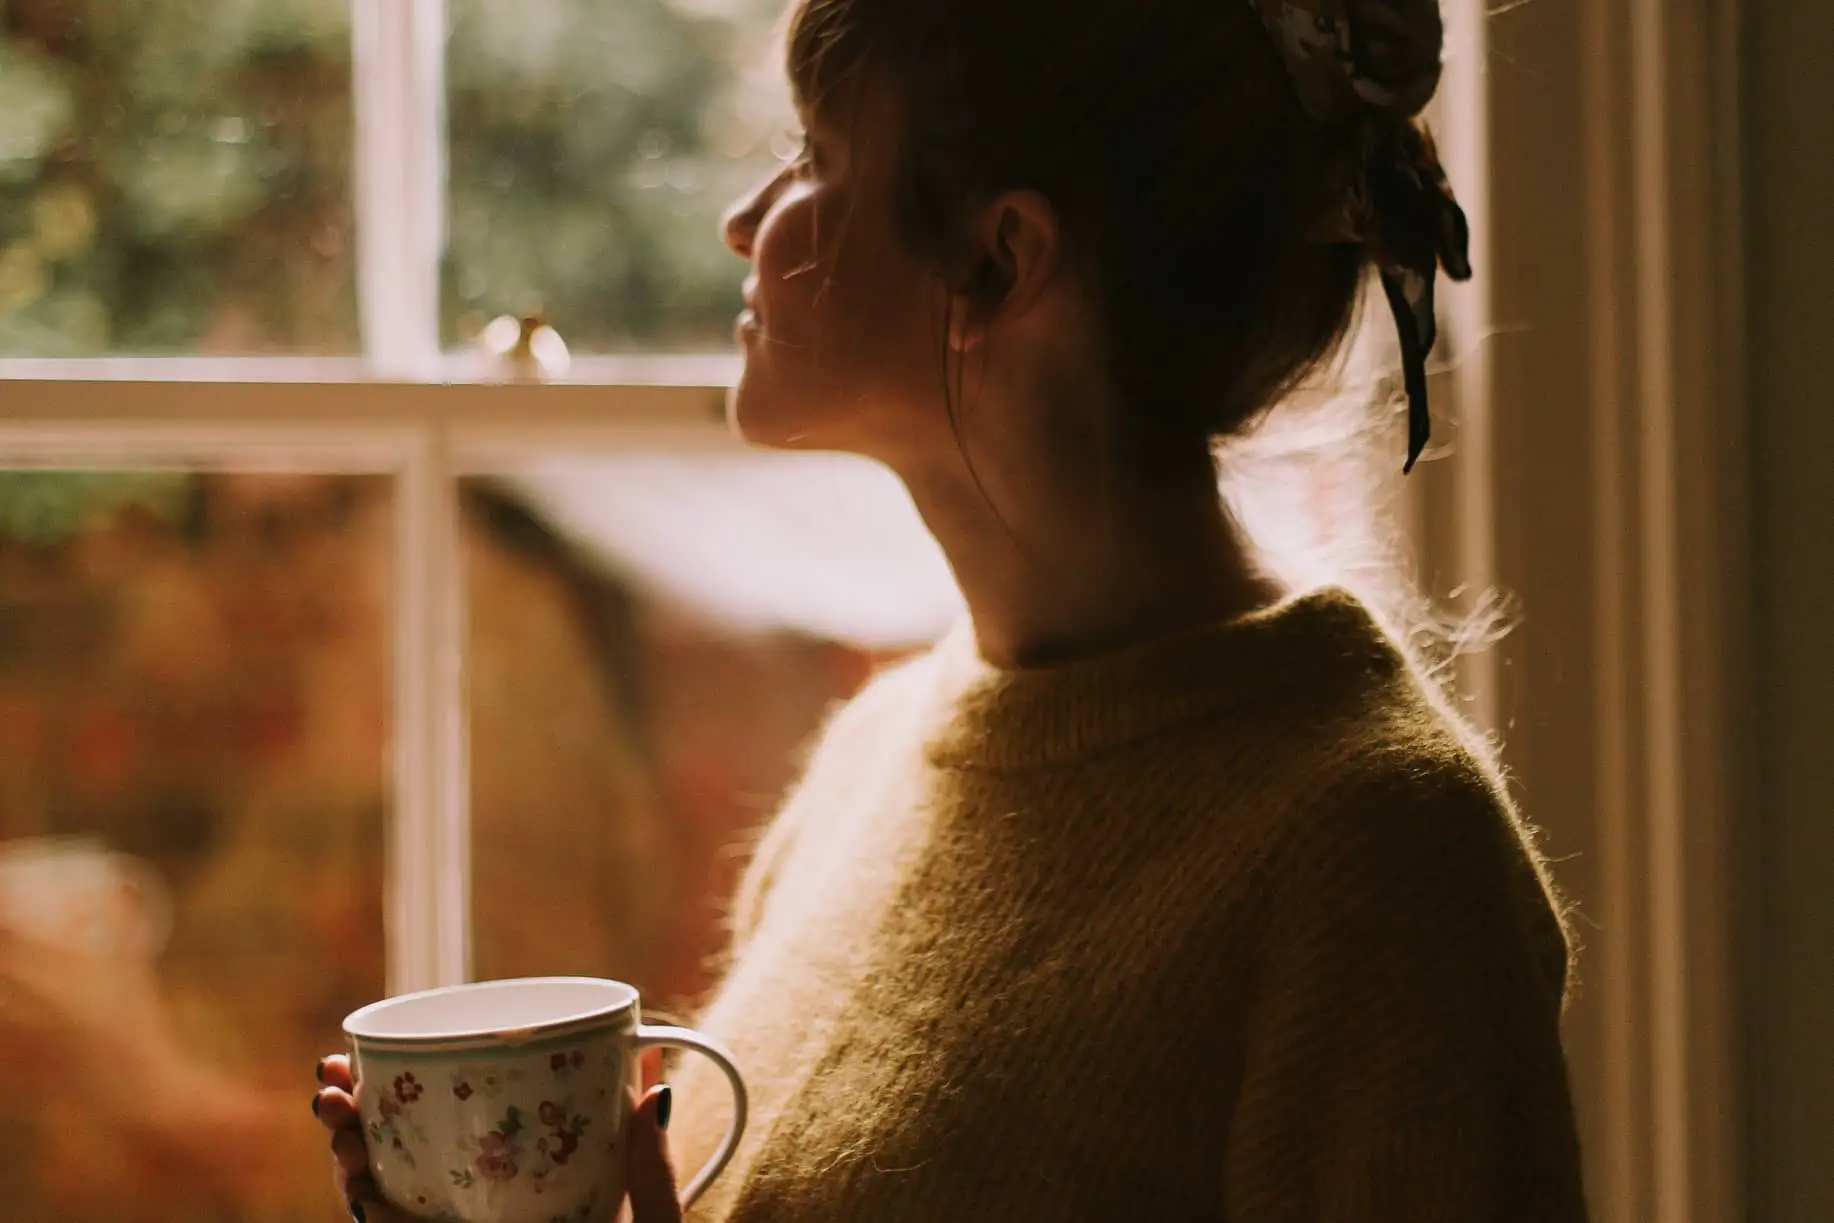 woman looking out of window holding a cup in her hands